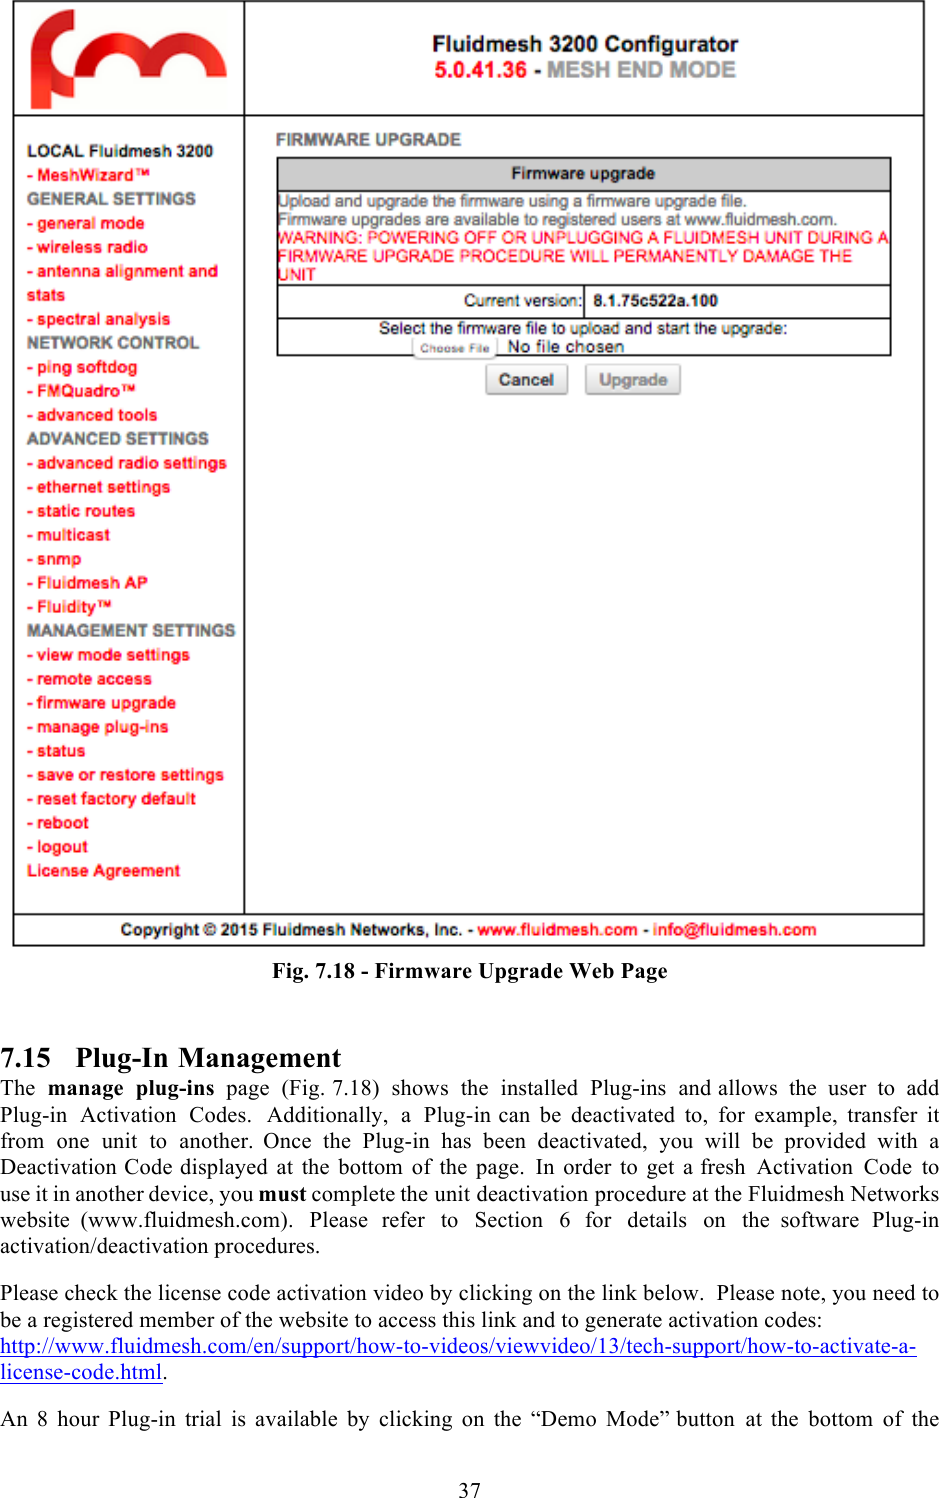  37   Fig. 7.18 - Firmware Upgrade Web Page  7.15 Plug-In Management The manage plug-ins page  (Fig. 7.18)  shows the installed Plug-ins and allows the user to add Plug-in Activation Codes.  Additionally,  a  Plug-in can be deactivated to, for example, transfer it from one unit to another.  Once the Plug-in has been deactivated, you will be provided with a Deactivation Code displayed at the bottom of the page. In order to get a fresh Activation Code to use it in another device, you must complete the unit deactivation procedure at the Fluidmesh Networks website  (www.fluidmesh.com). Please refer to Section  6   for details on the  software Plug-in activation/deactivation procedures.  Please check the license code activation video by clicking on the link below.  Please note, you need to be a registered member of the website to access this link and to generate activation codes: http://www.fluidmesh.com/en/support/how-to-videos/viewvideo/13/tech-support/how-to-activate-a-license-code.html.  An  8  hour  Plug-in trial is available by clicking on the “Demo Mode” button at the bottom of the 